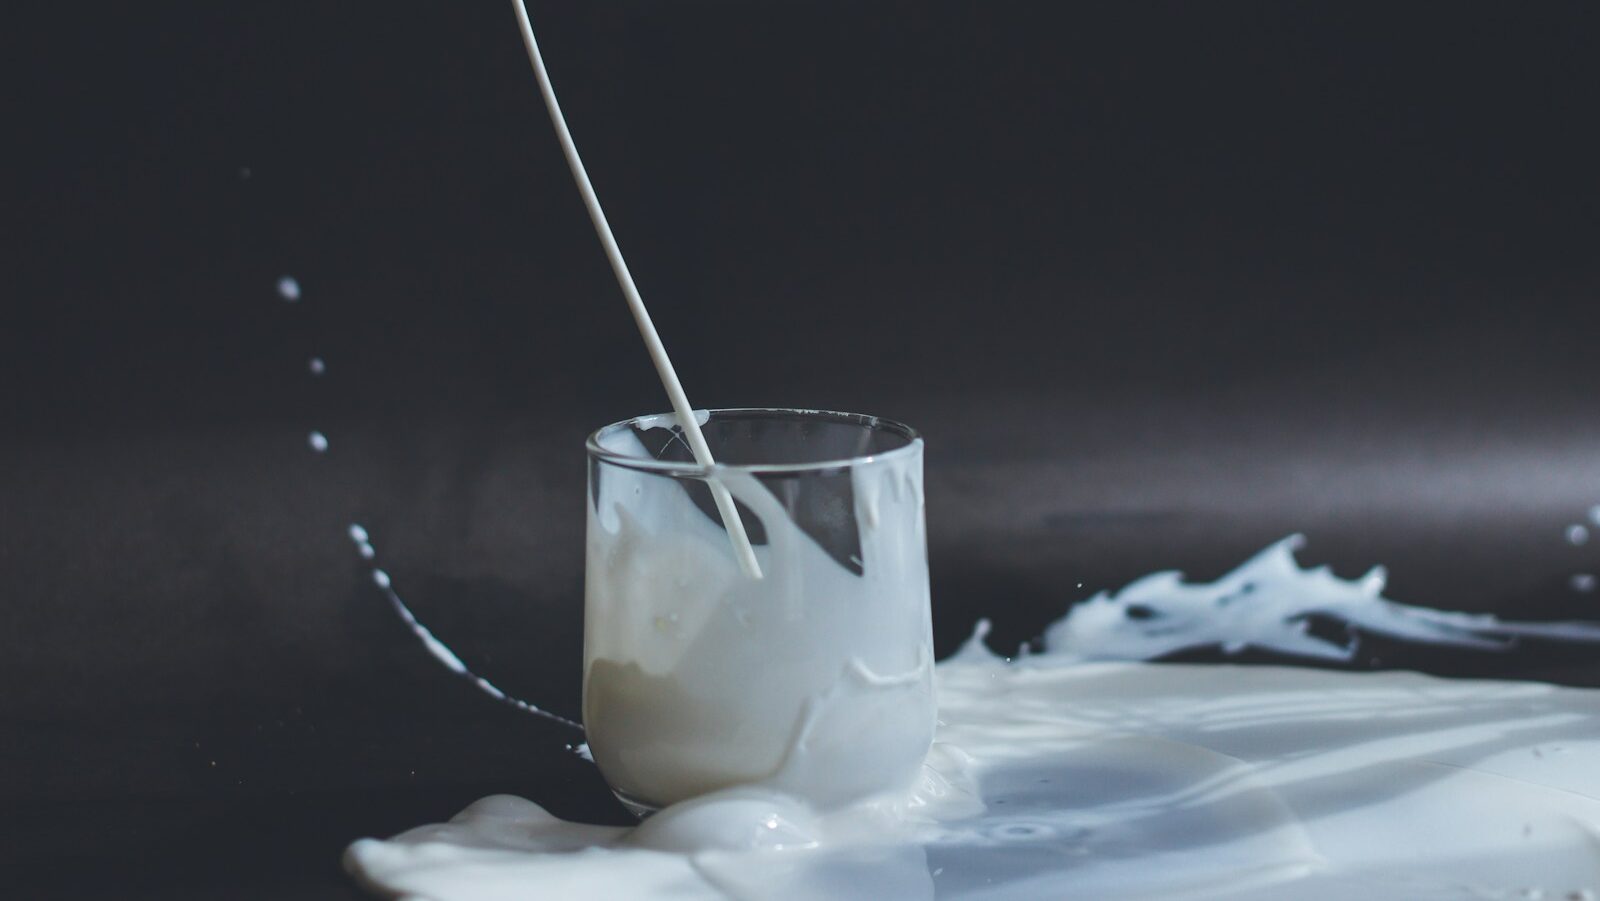 Spilled milk, depicting mistakes and failures